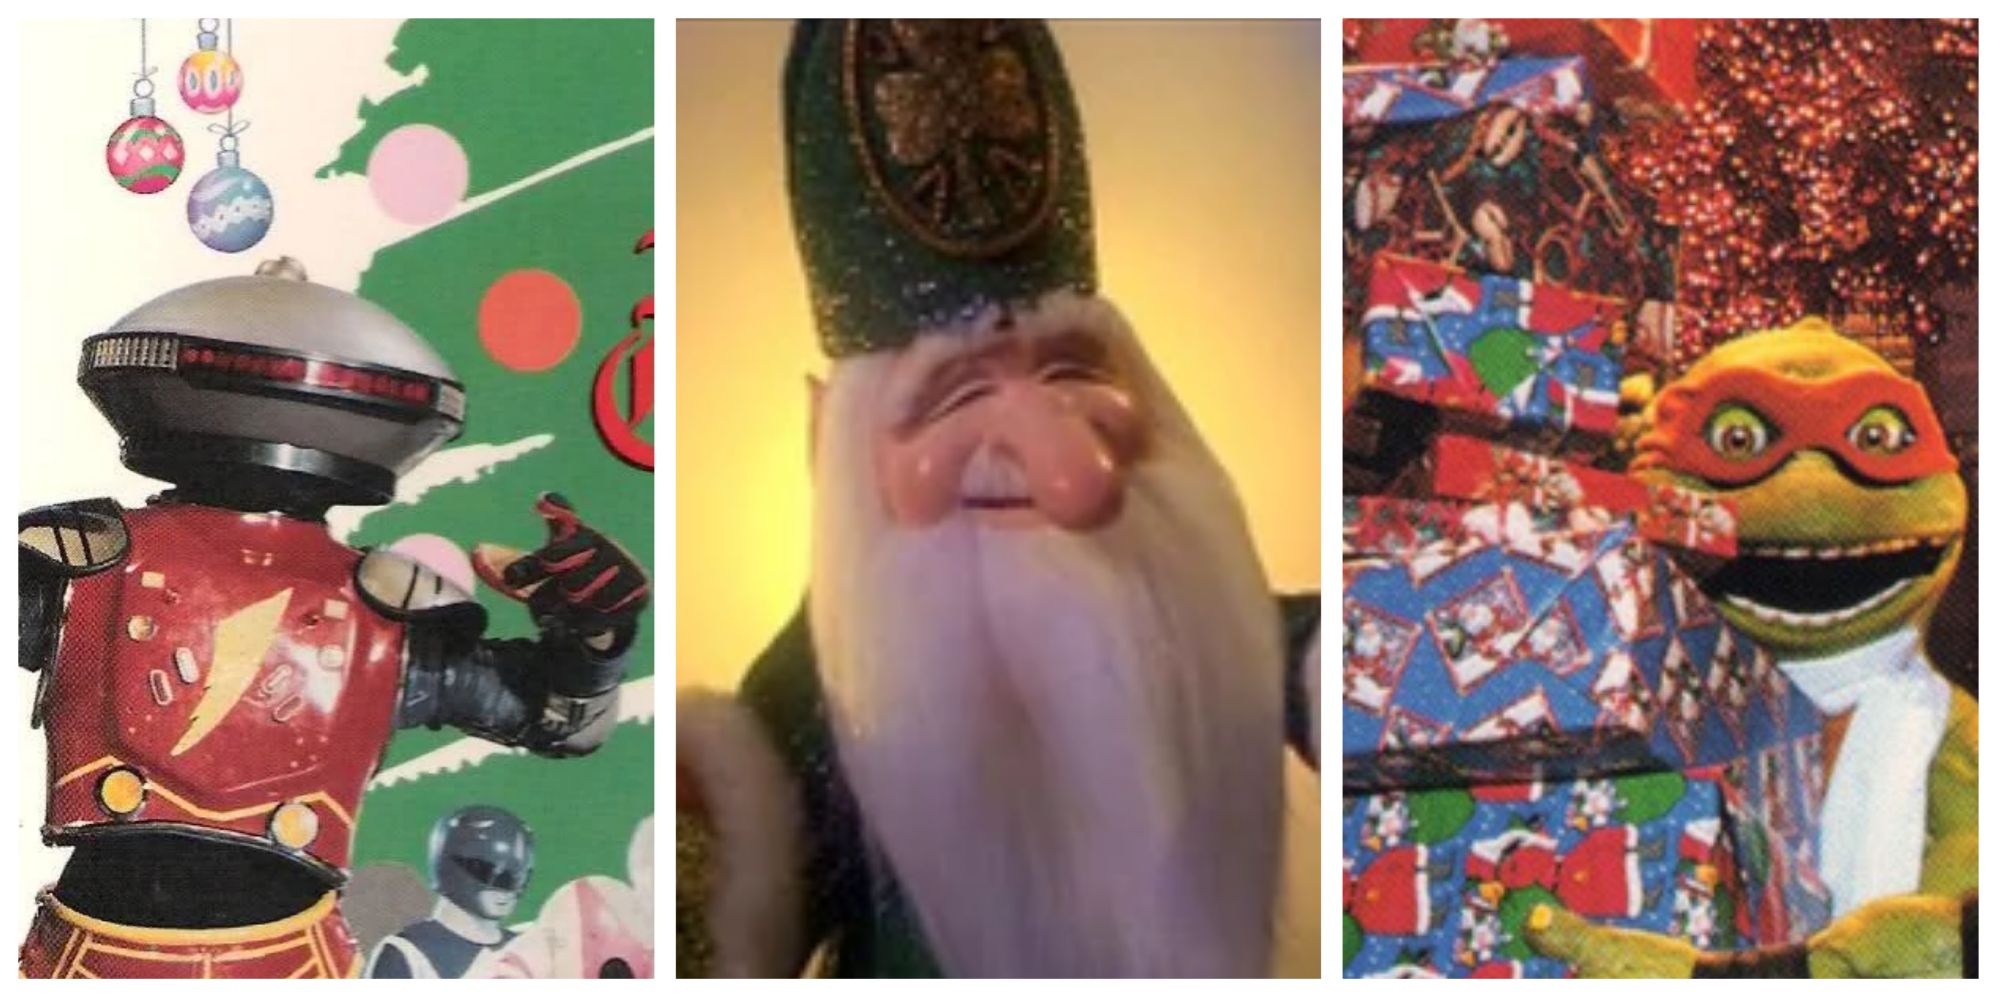 The Weirdest Holiday Special Power Rangers Alpha Leprechaun's Christmas Gold We Wish You a Turtle Christmas